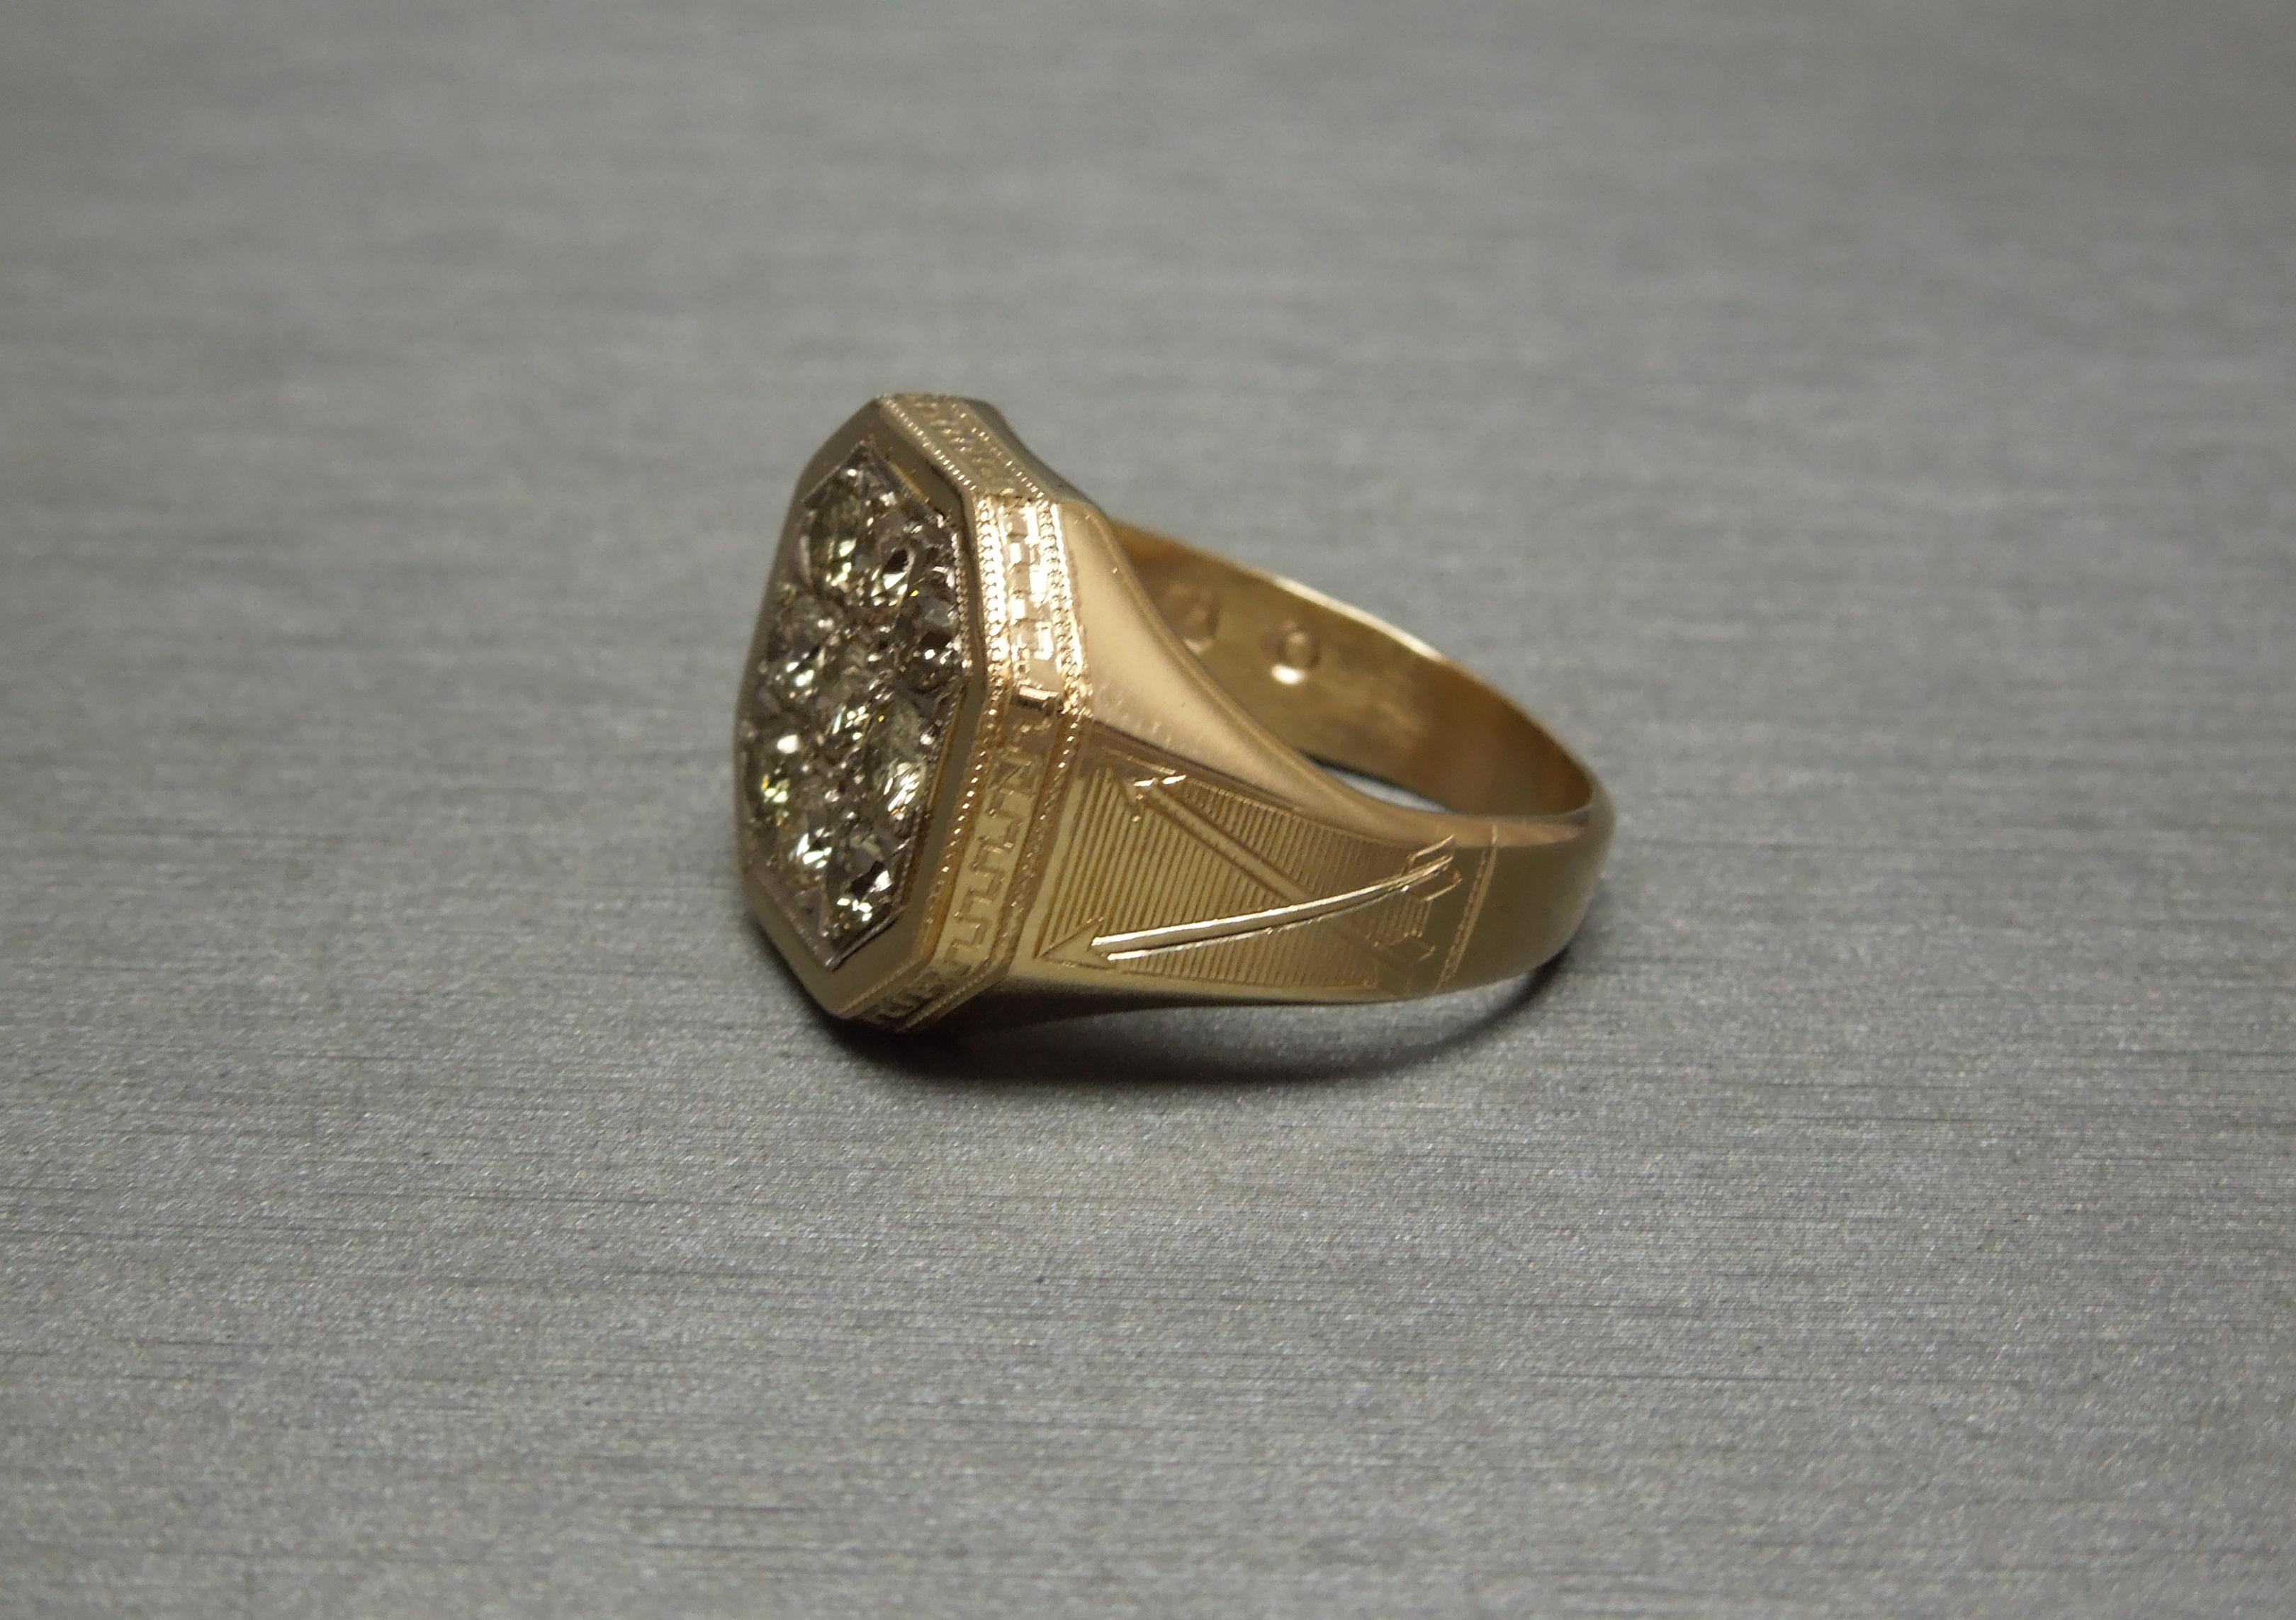 A recreation of the Art Deco period, yet combining both Greek & Roman influences. With an exceptionally detailed Hand-Tooled Engraved arrow design on each side. Certainly an everyday wearable ring for a man, or a woman if desired as well, due to the